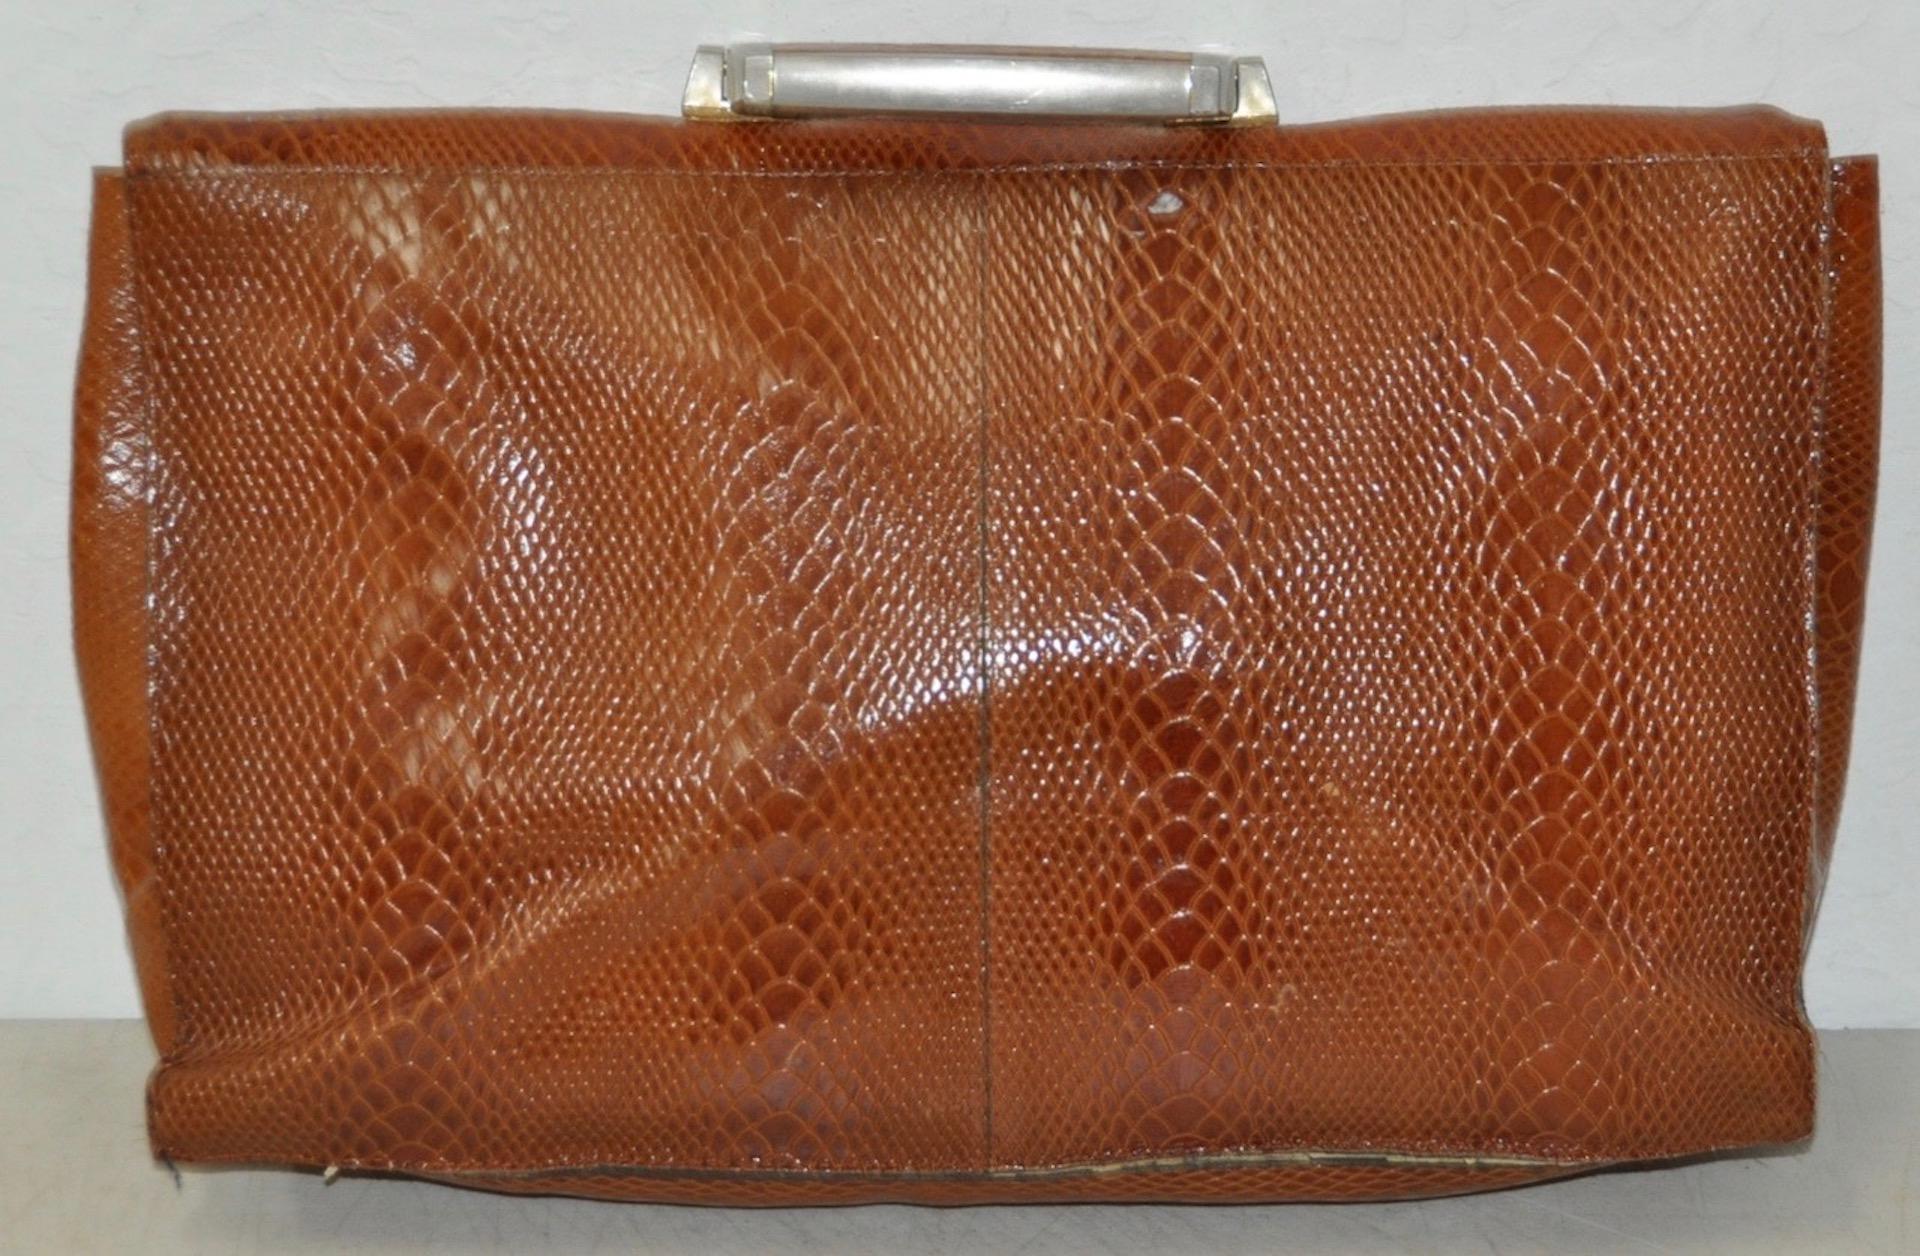 Wonderful vintage crocodile leather hand bag by Amiet

Amiet is known for their exceptional craftsmanship and quality leathers.

This is a fine old crocodile hand bag. There is no shoulder strap with this vintage bag.

Dimensions 16.5